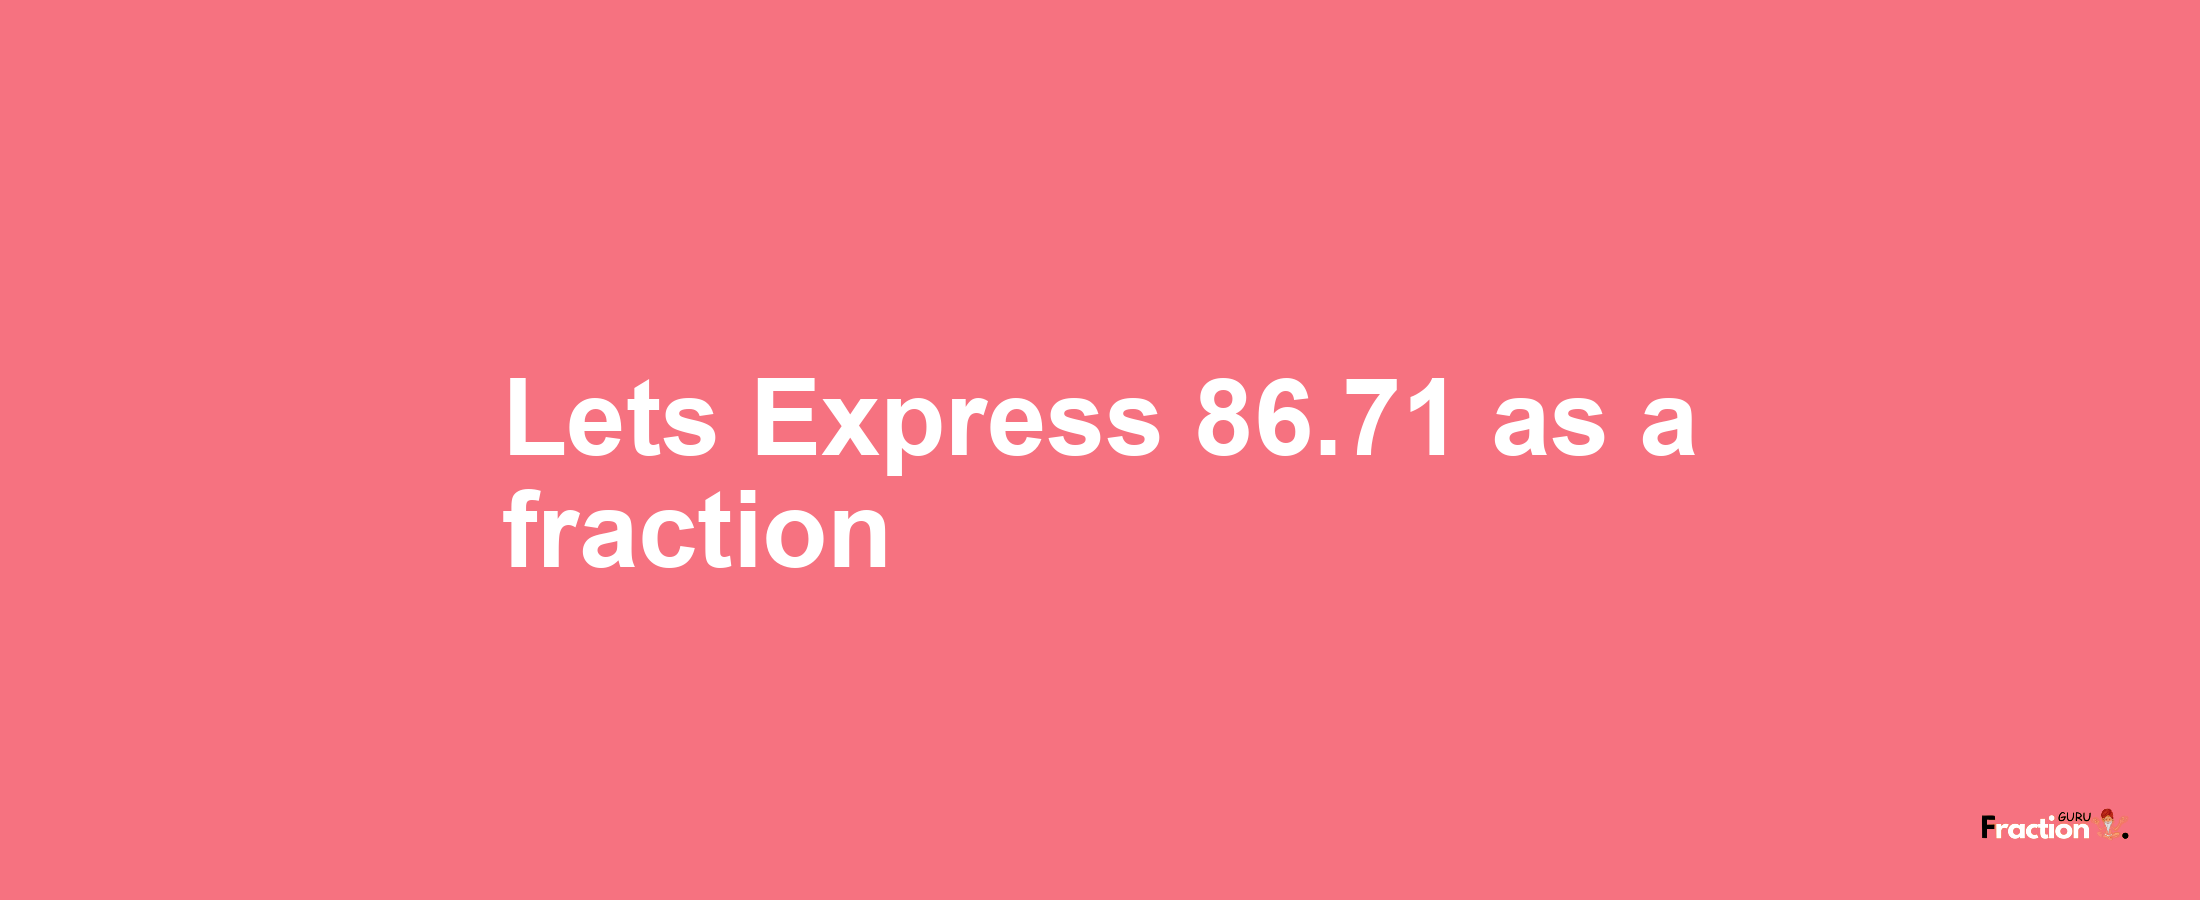 Lets Express 86.71 as afraction